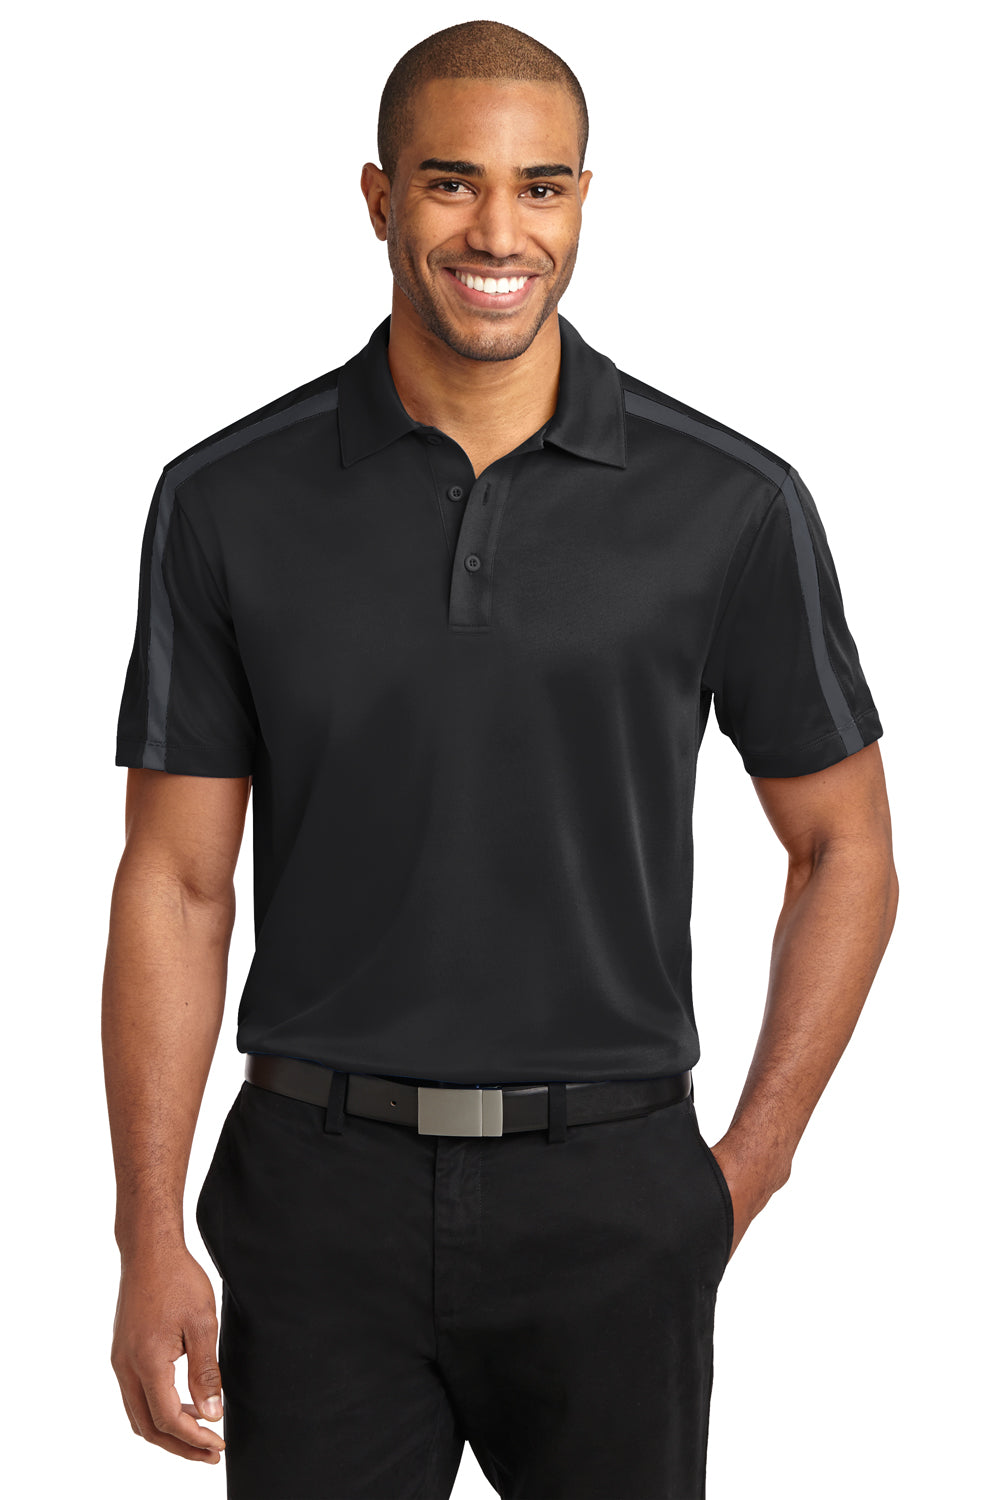 Port Authority K547 Mens Silk Touch Performance Moisture Wicking Short Sleeve Polo Shirt Black/Grey Front